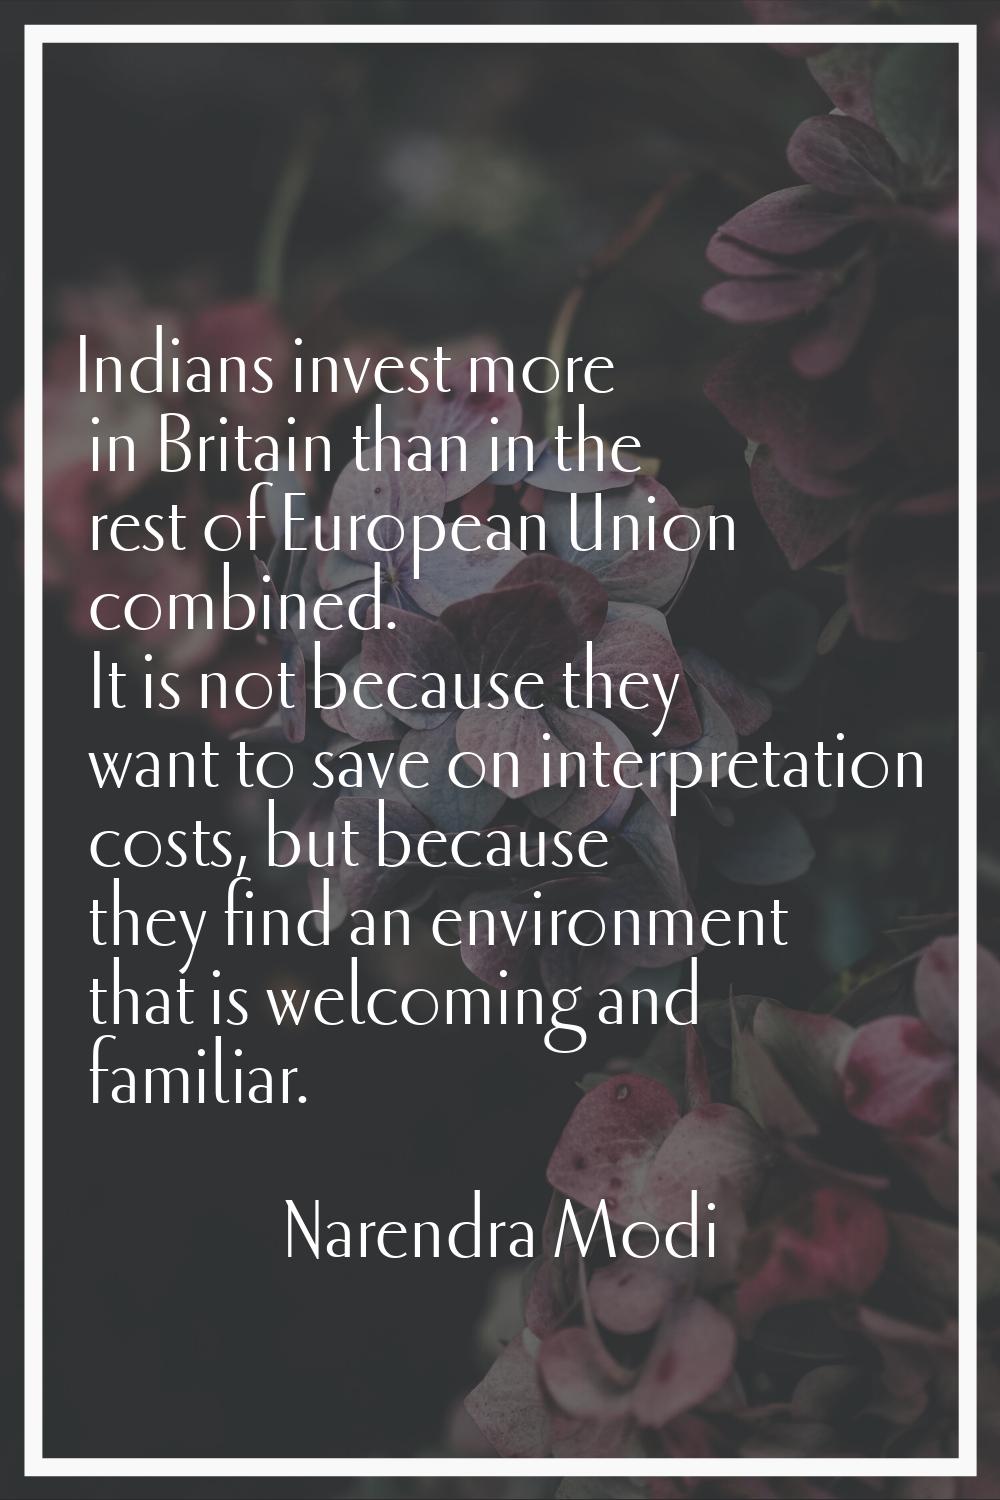 Indians invest more in Britain than in the rest of European Union combined. It is not because they 